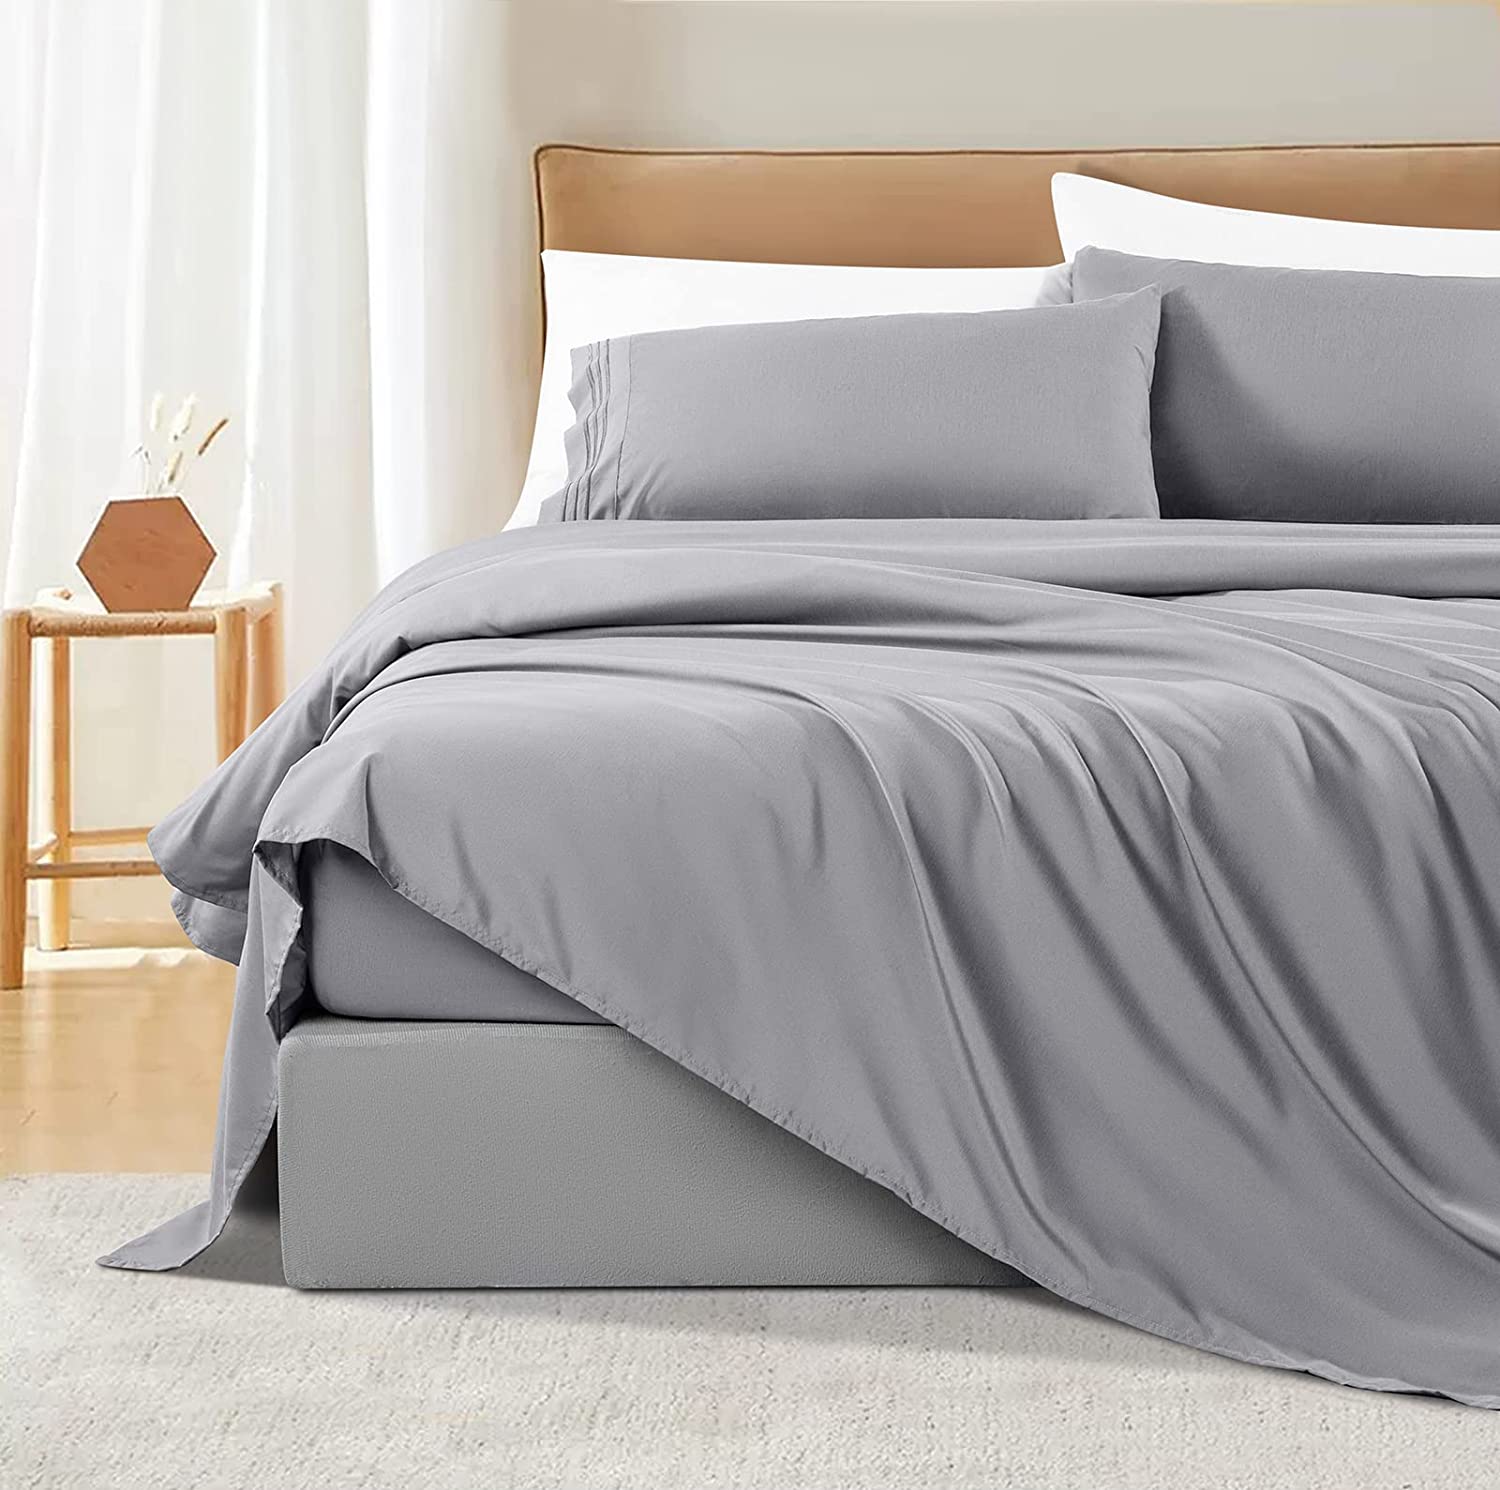 Soft Twill Bamboo Bed Sheet Set Breathable Hypoallergenic for Sensitive Skin Allergies